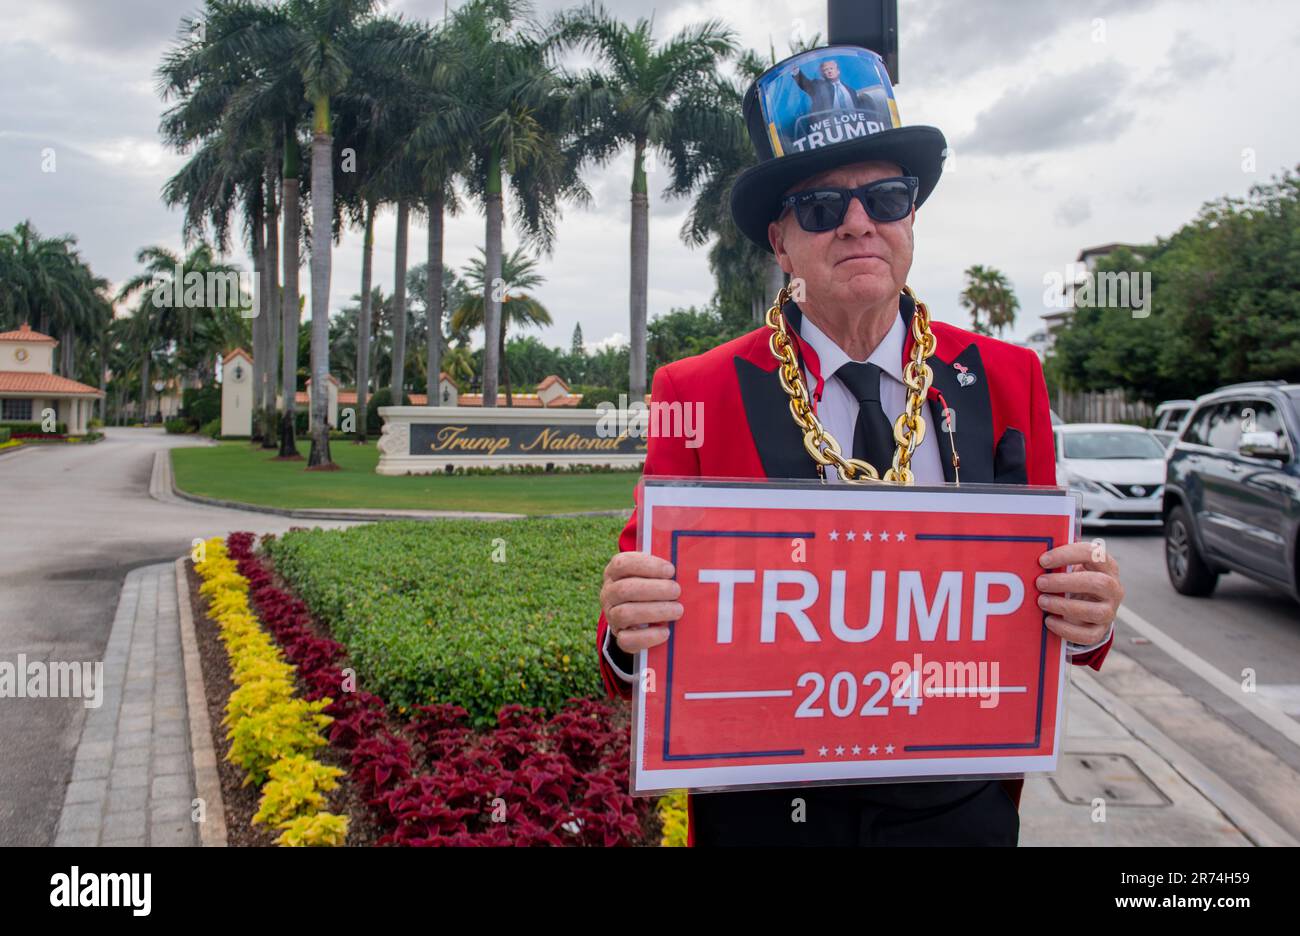 June 12, 2023, Doral, Florida, USA: English Actor GREGG DONOVAN, 64, with Pro-Trump signs, saying TRUMP 2024, the unofficial former 'Ambassador of Hollywood, California', stands in front of the Trump National Doral Golf course. A big Trump supporter, Donovan had just arrived in Miami to protest the indictment of former U.S. President Trump. Gregg was surprised by lack of protesters. To combat the lingering ''Pretty Woman'' motion picture portrayal of Beverly Hills merchants as being snooty and rude and both to help lure shoppers back to the nation's ritziest stores and end an economic slump th Stock Photo